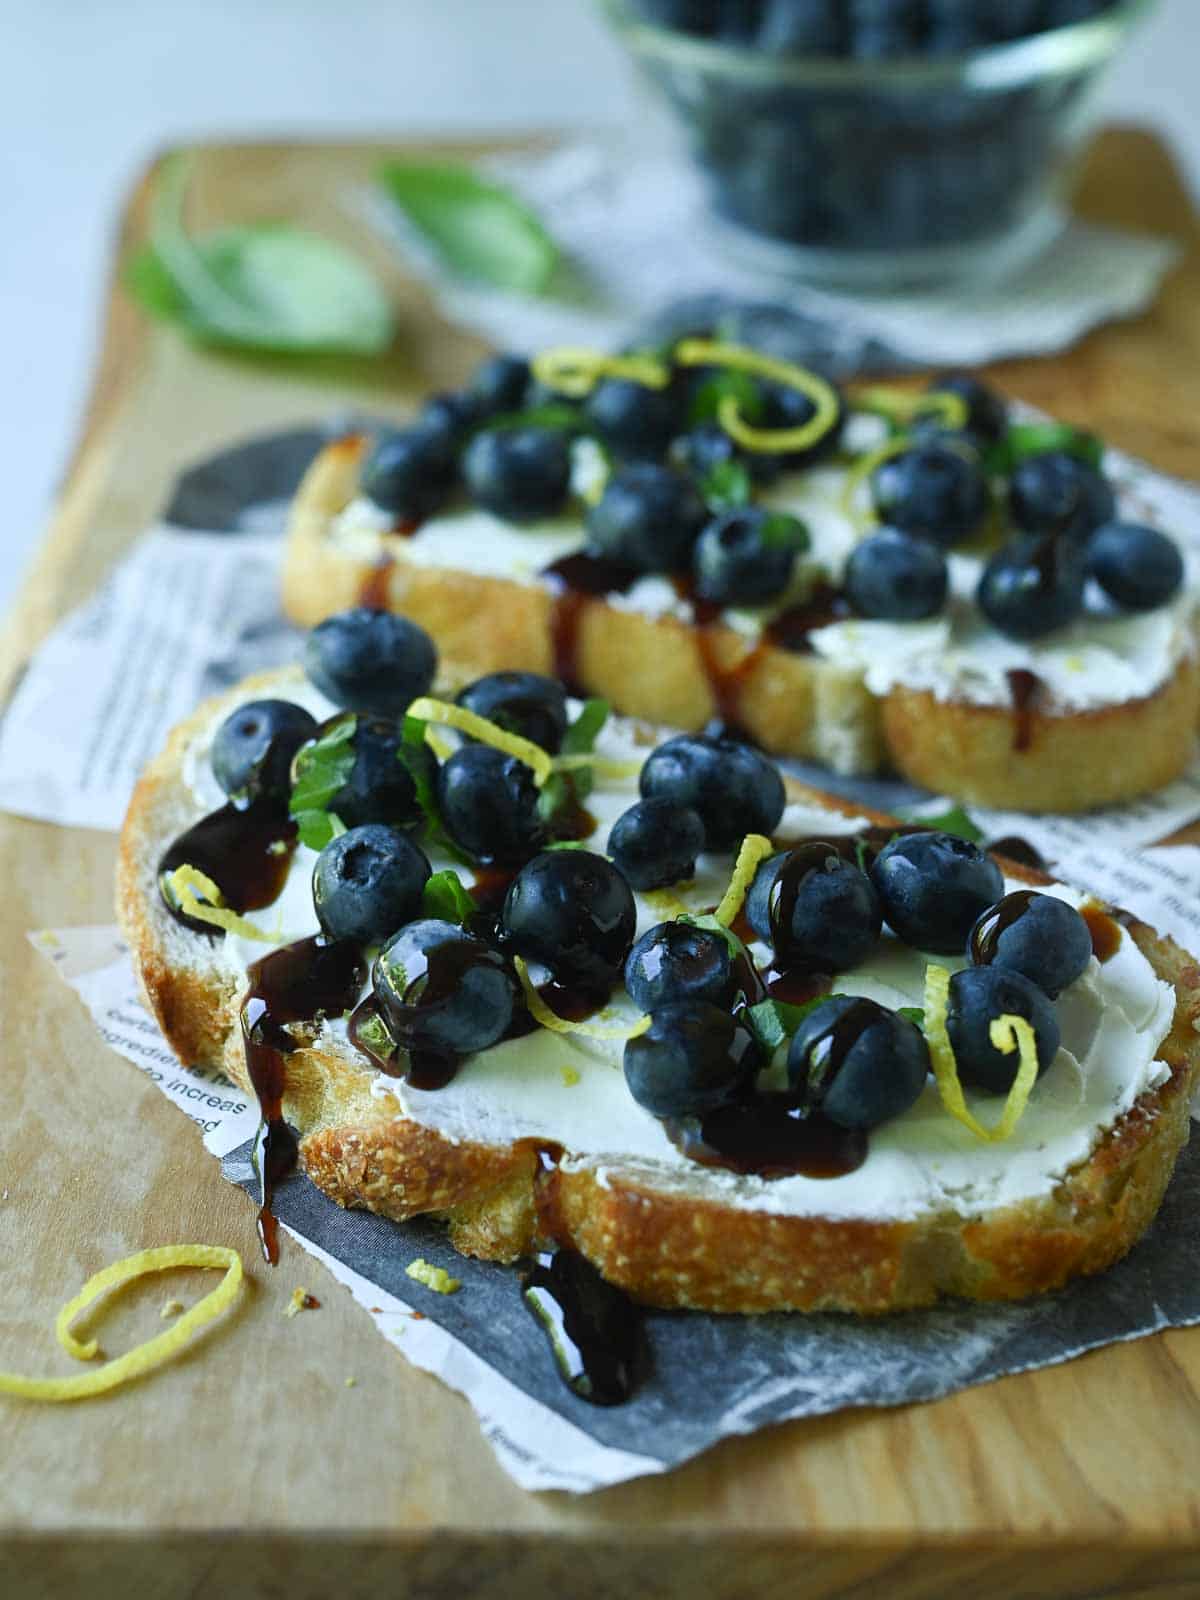 Two blueberry toasts on a wood board with date syrup drizzled on them.